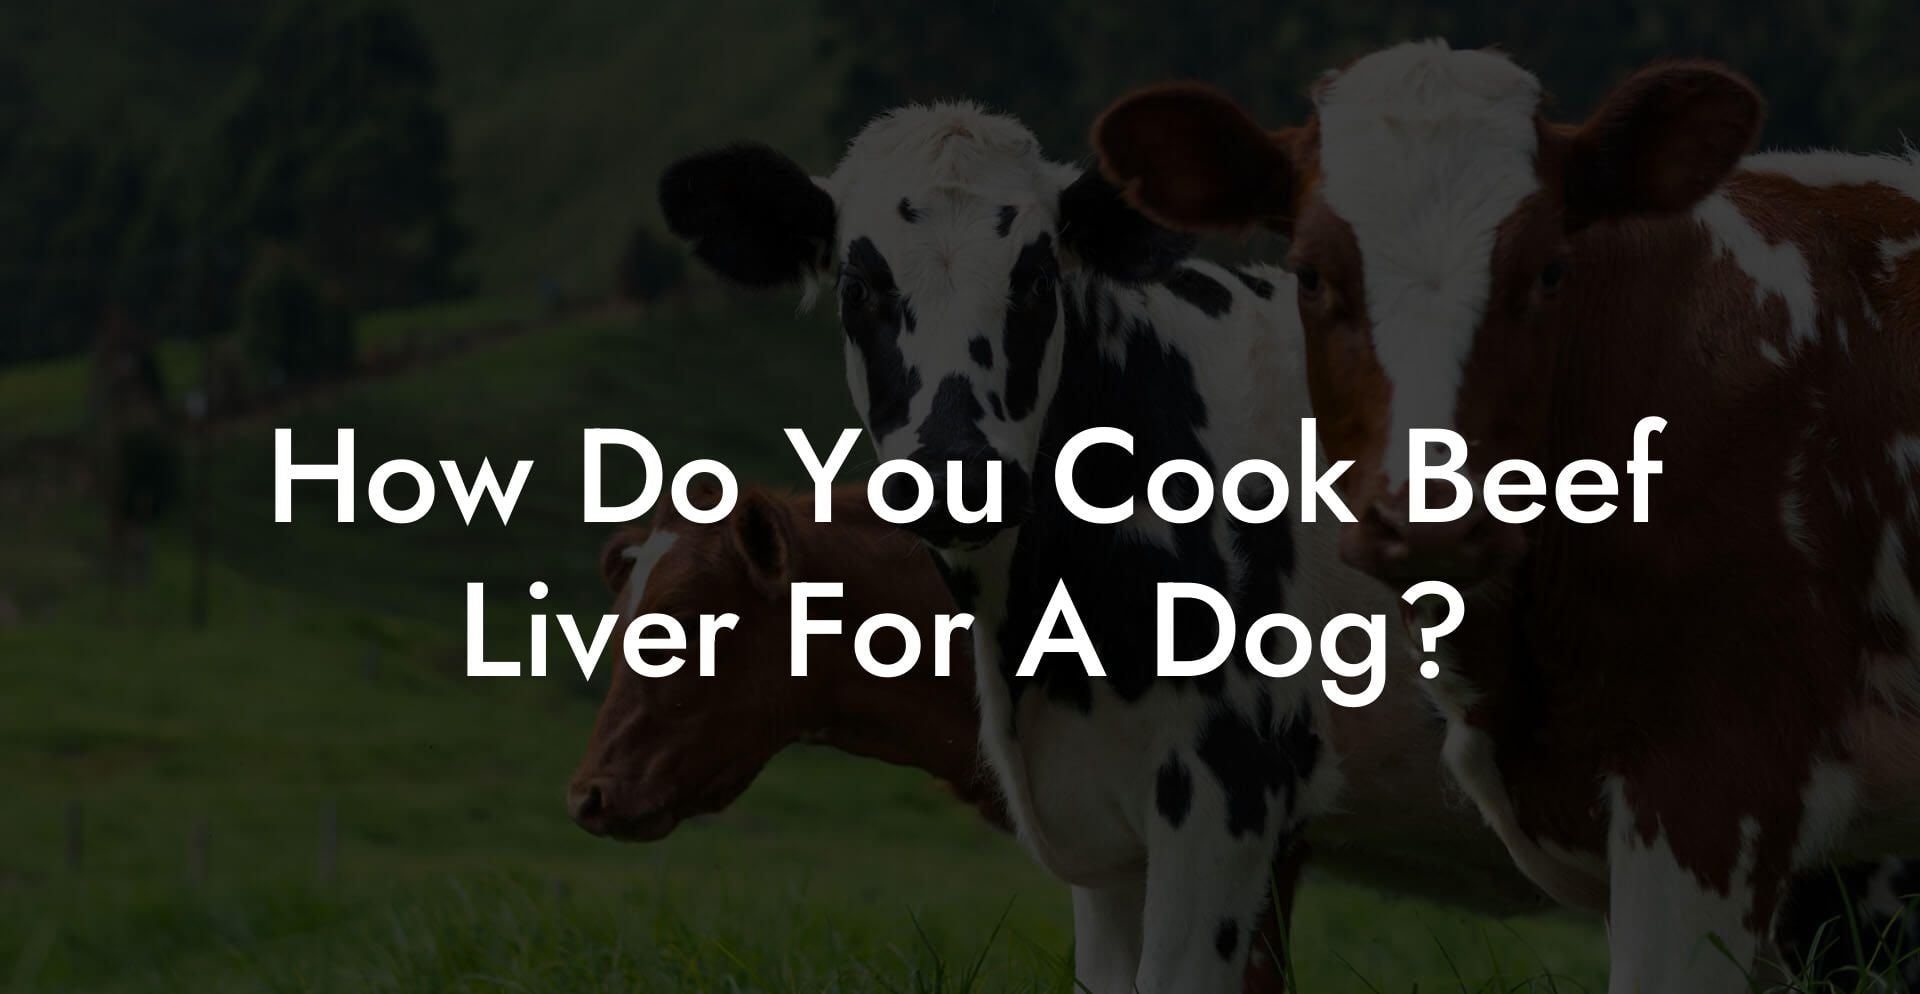 How Do You Cook Beef Liver For A Dog?